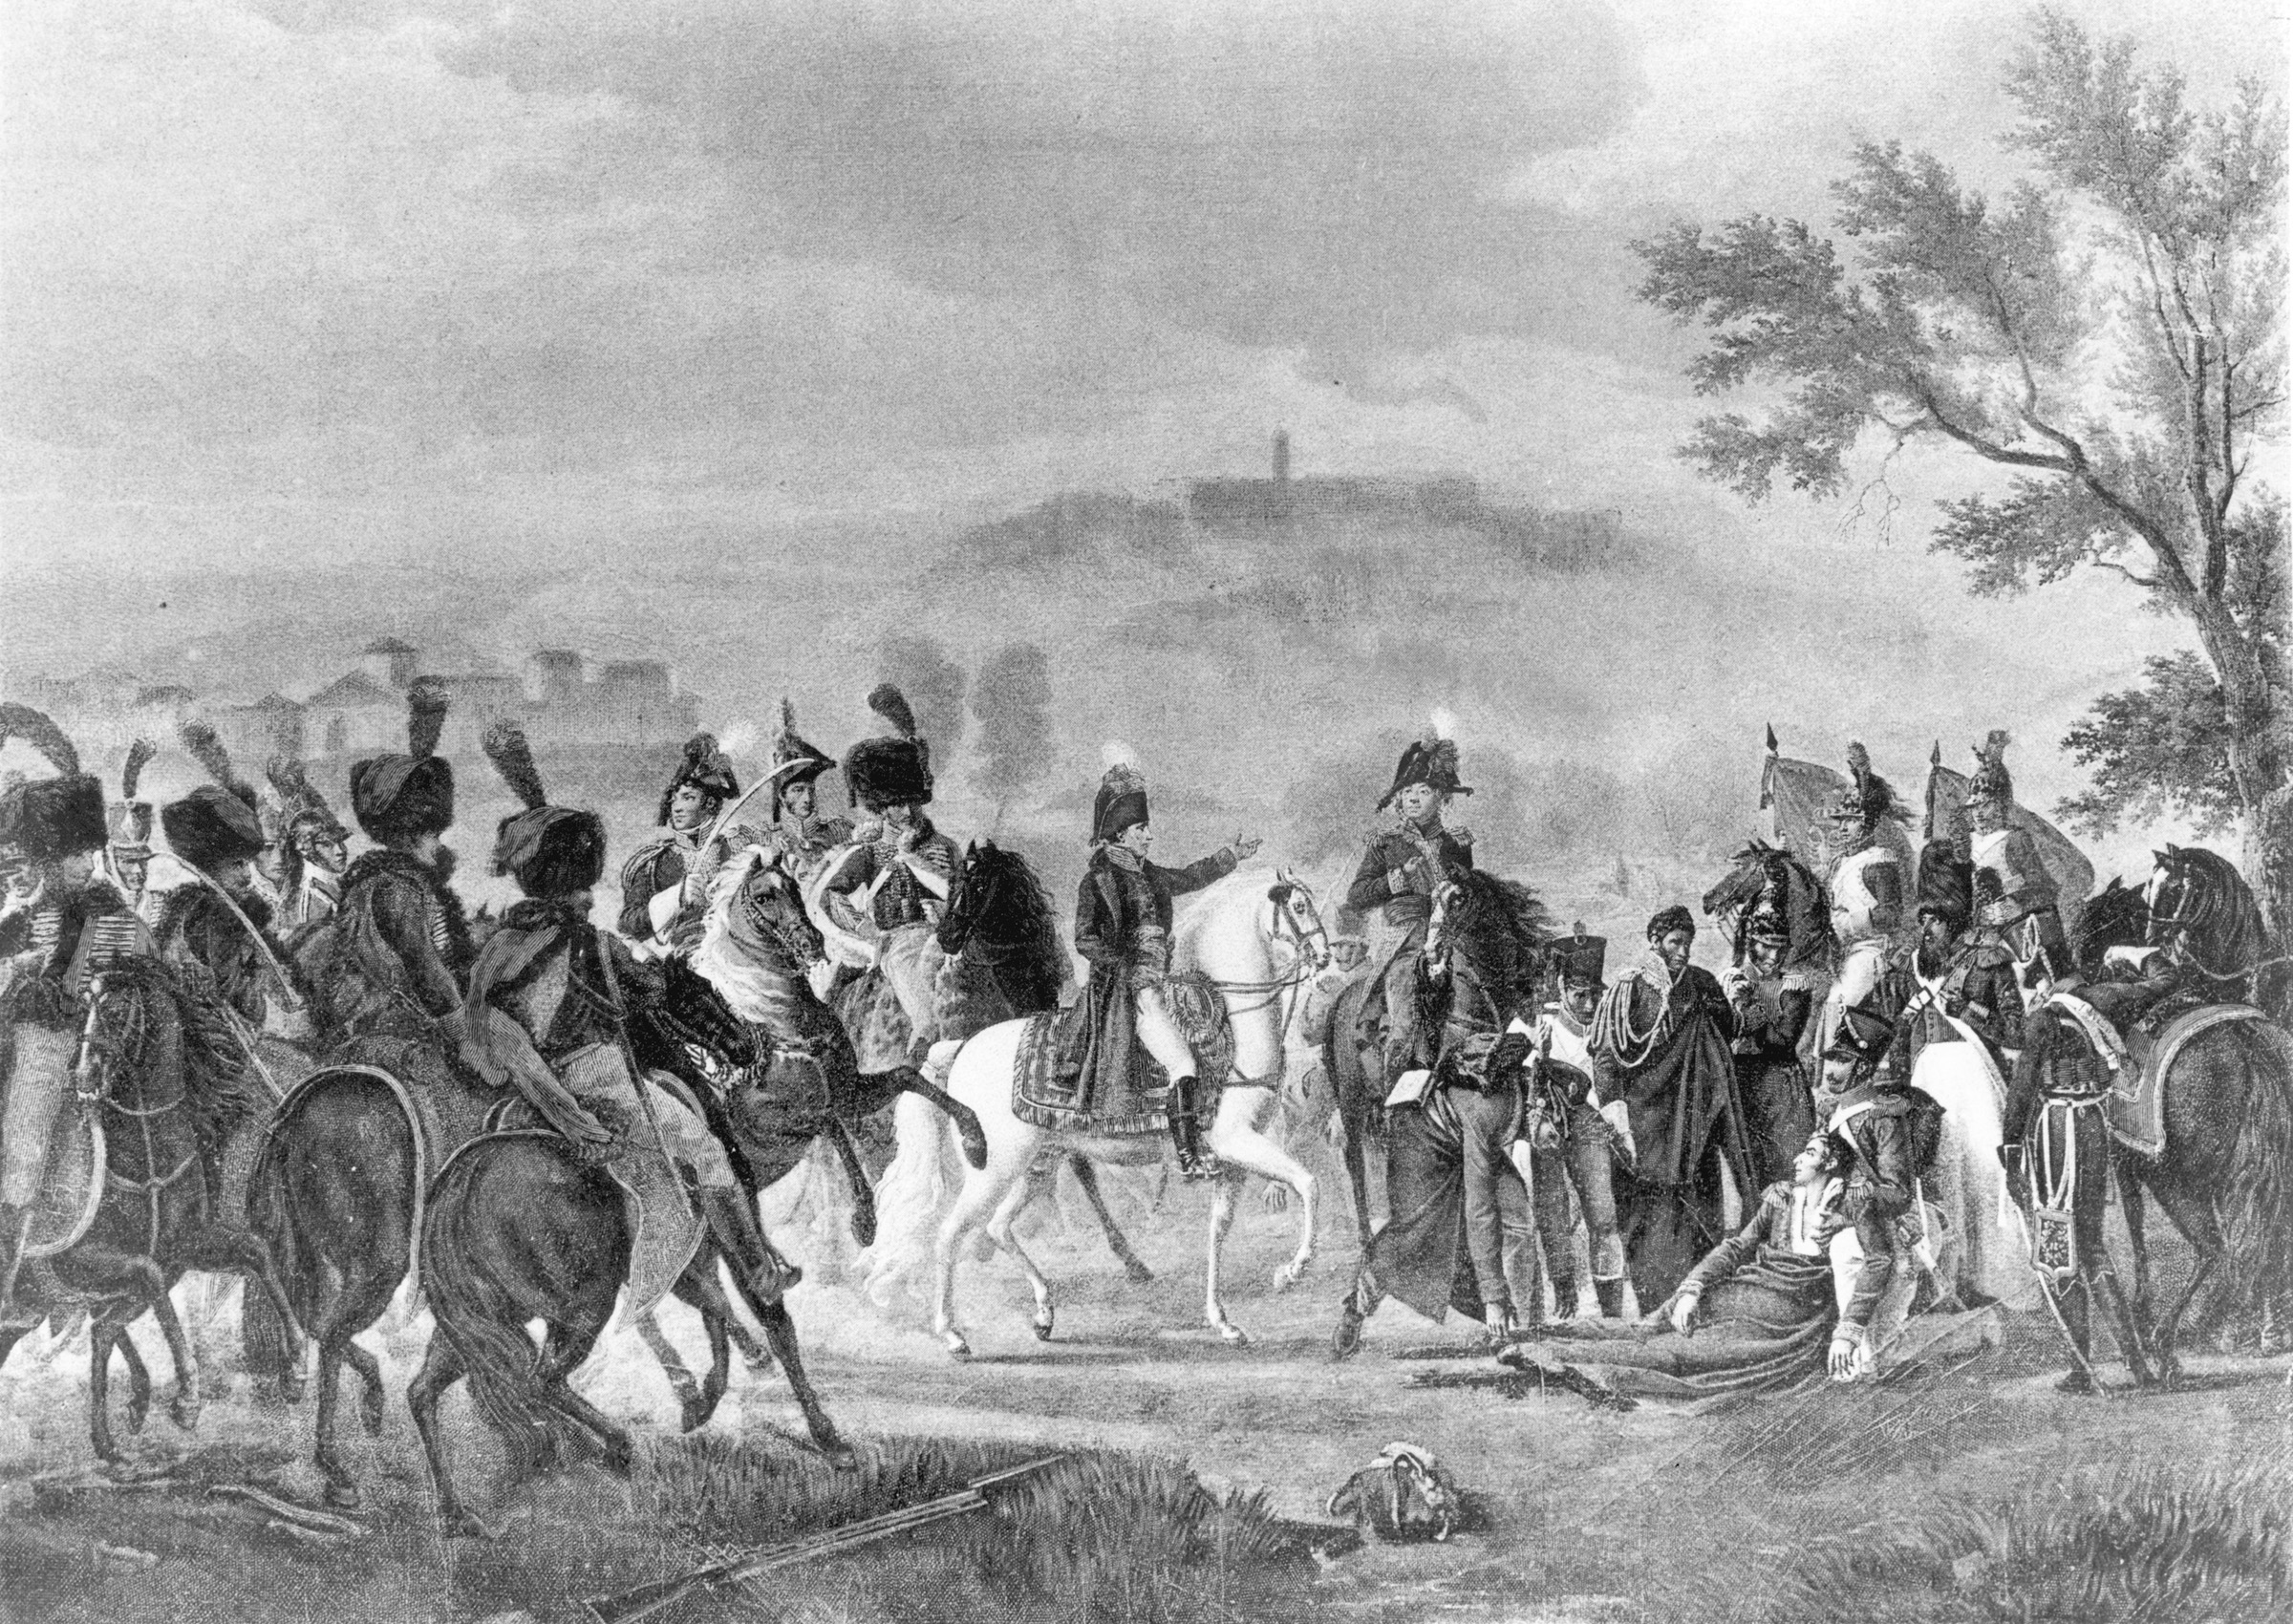 As the Austrian commander lies dying, Bonaparte conducts affairs after resecuring Dego.  The struggle on April 14, 1796, was bloody but also an important victory early in the campaign.